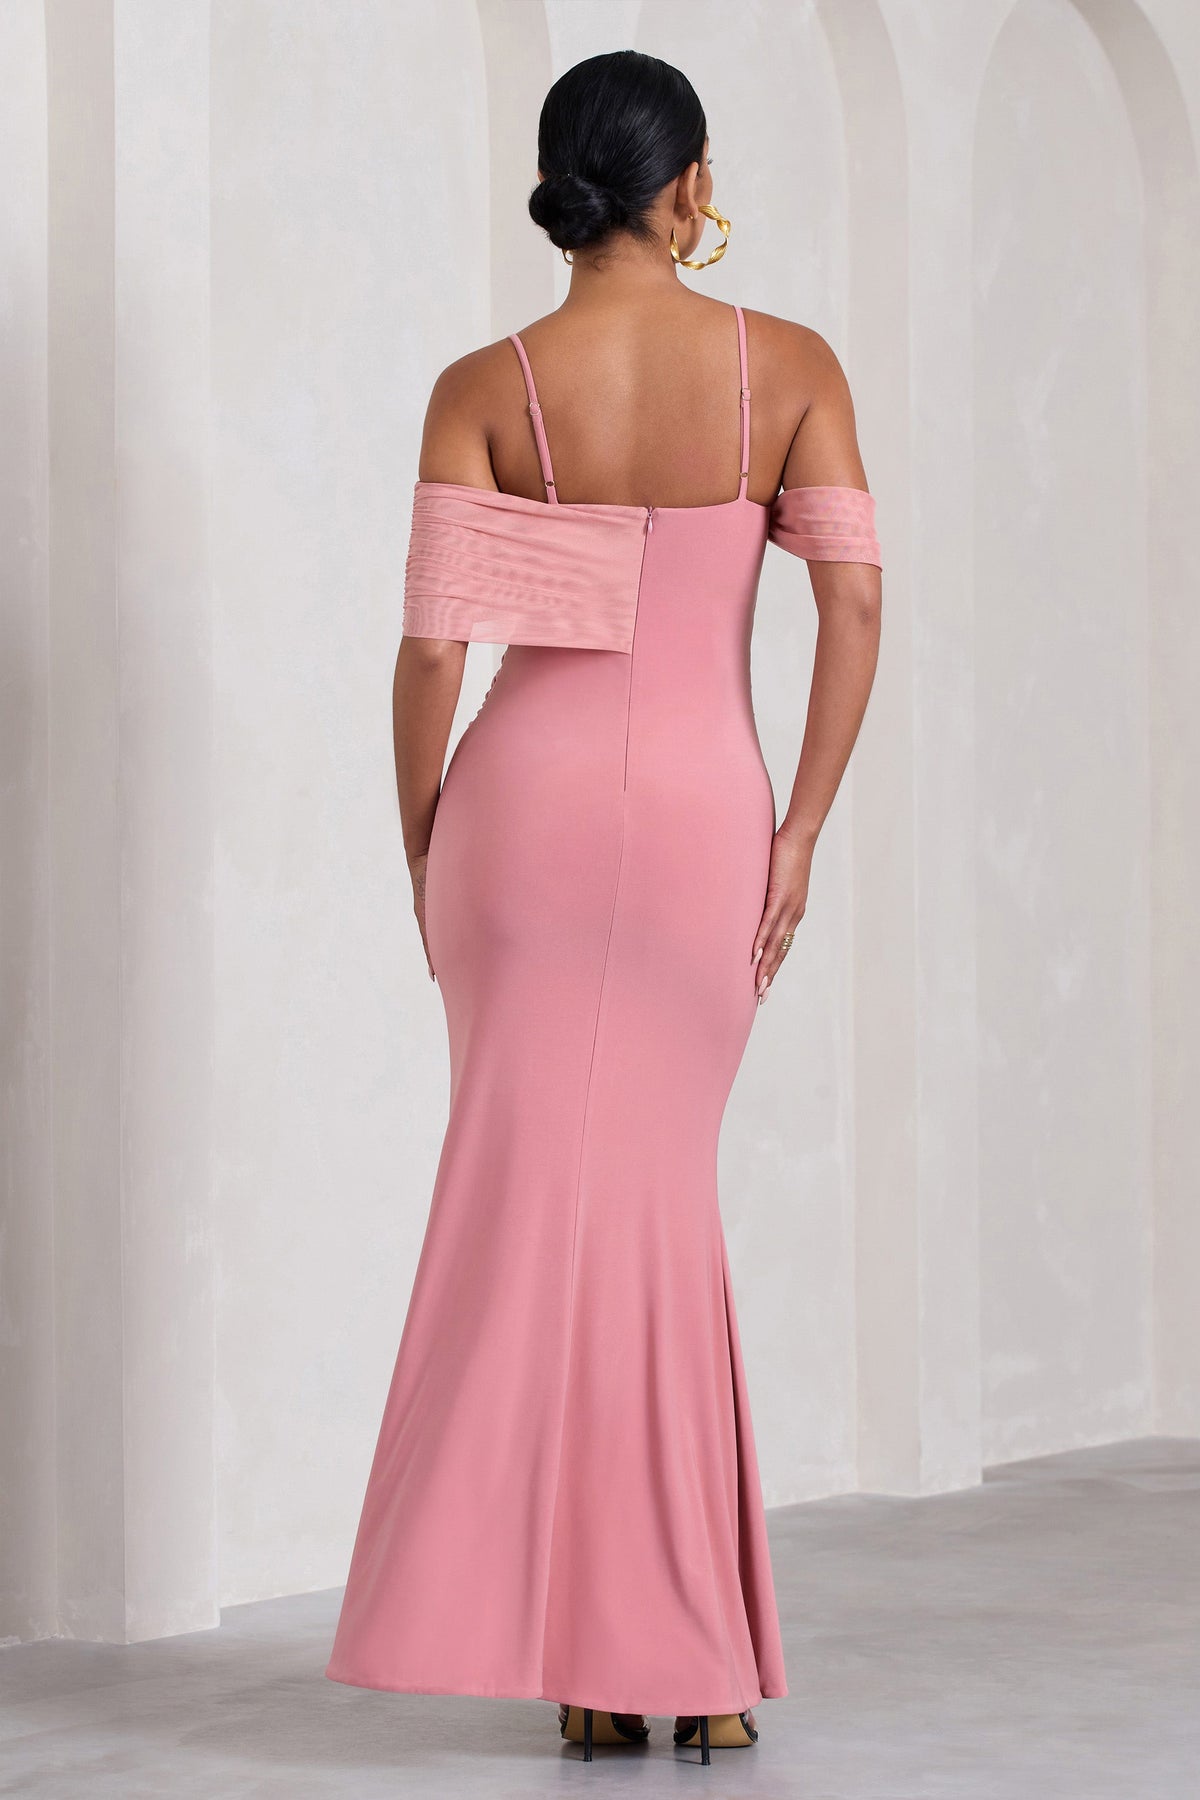 Oh Baby Hot Pink Maternity One Shoulder Bodycon Maxi Dress – Club L London  - USA